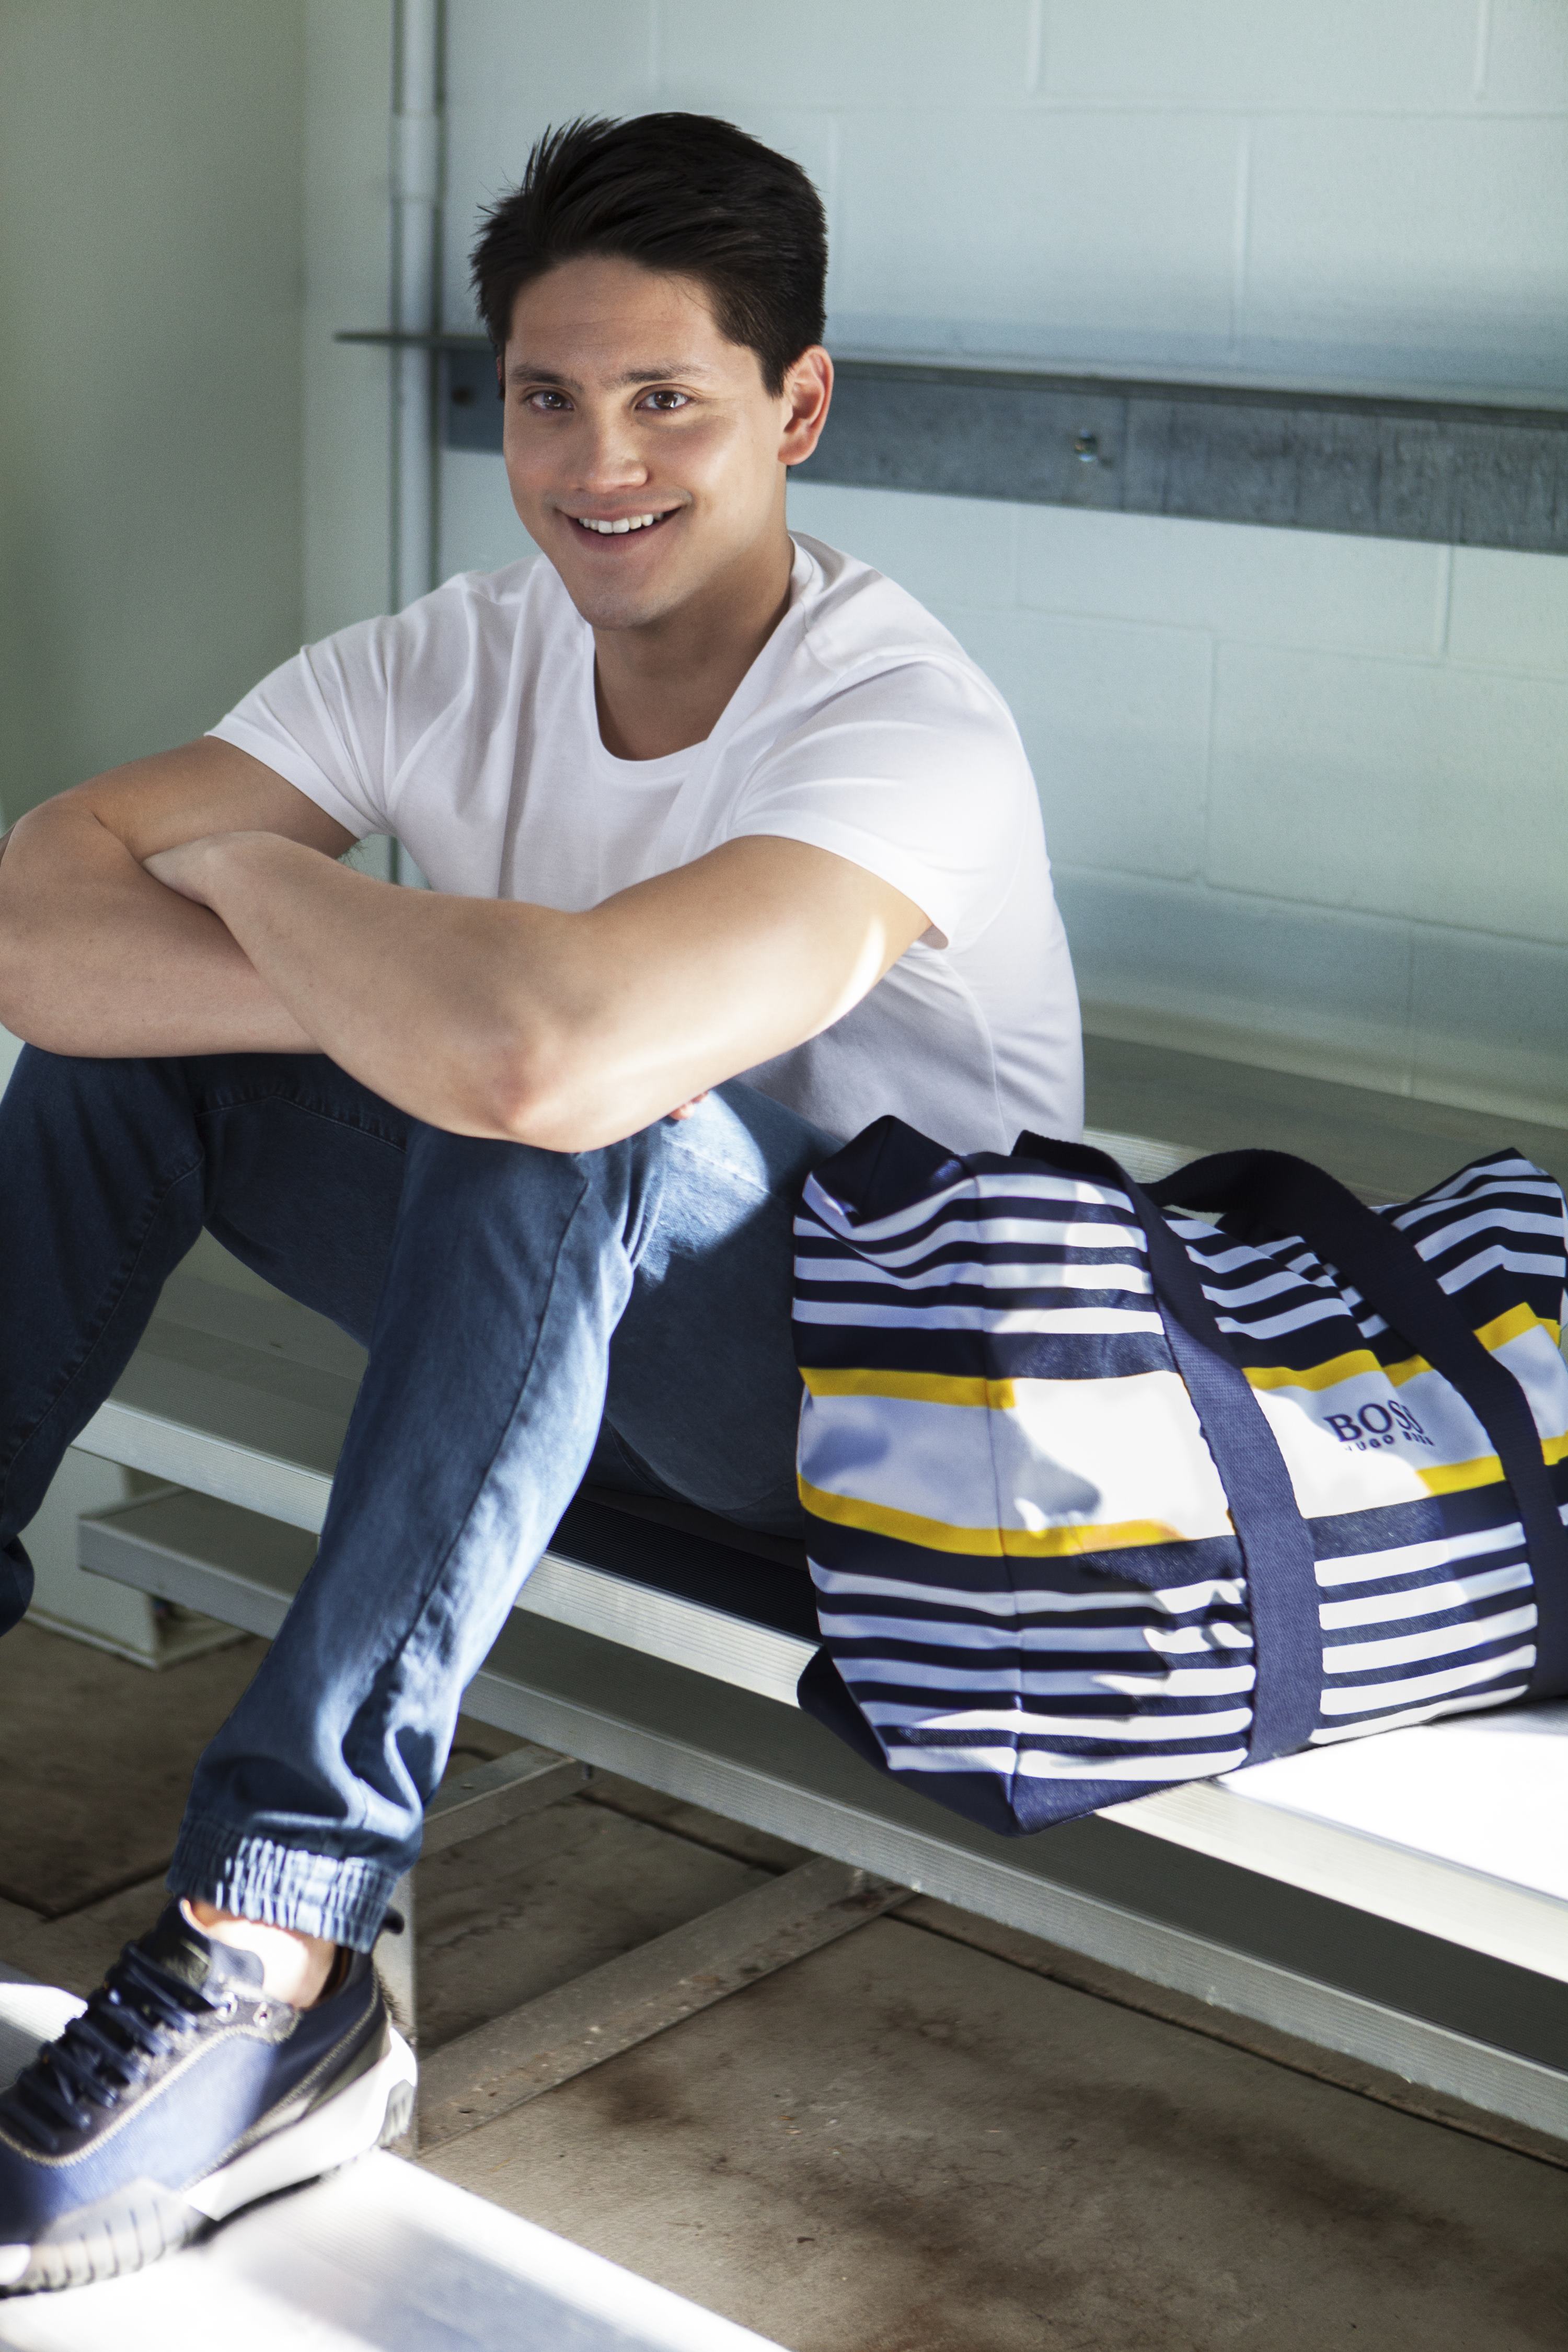 A First Look At The Hugo Boss X Joseph Schooling Capsule Collection